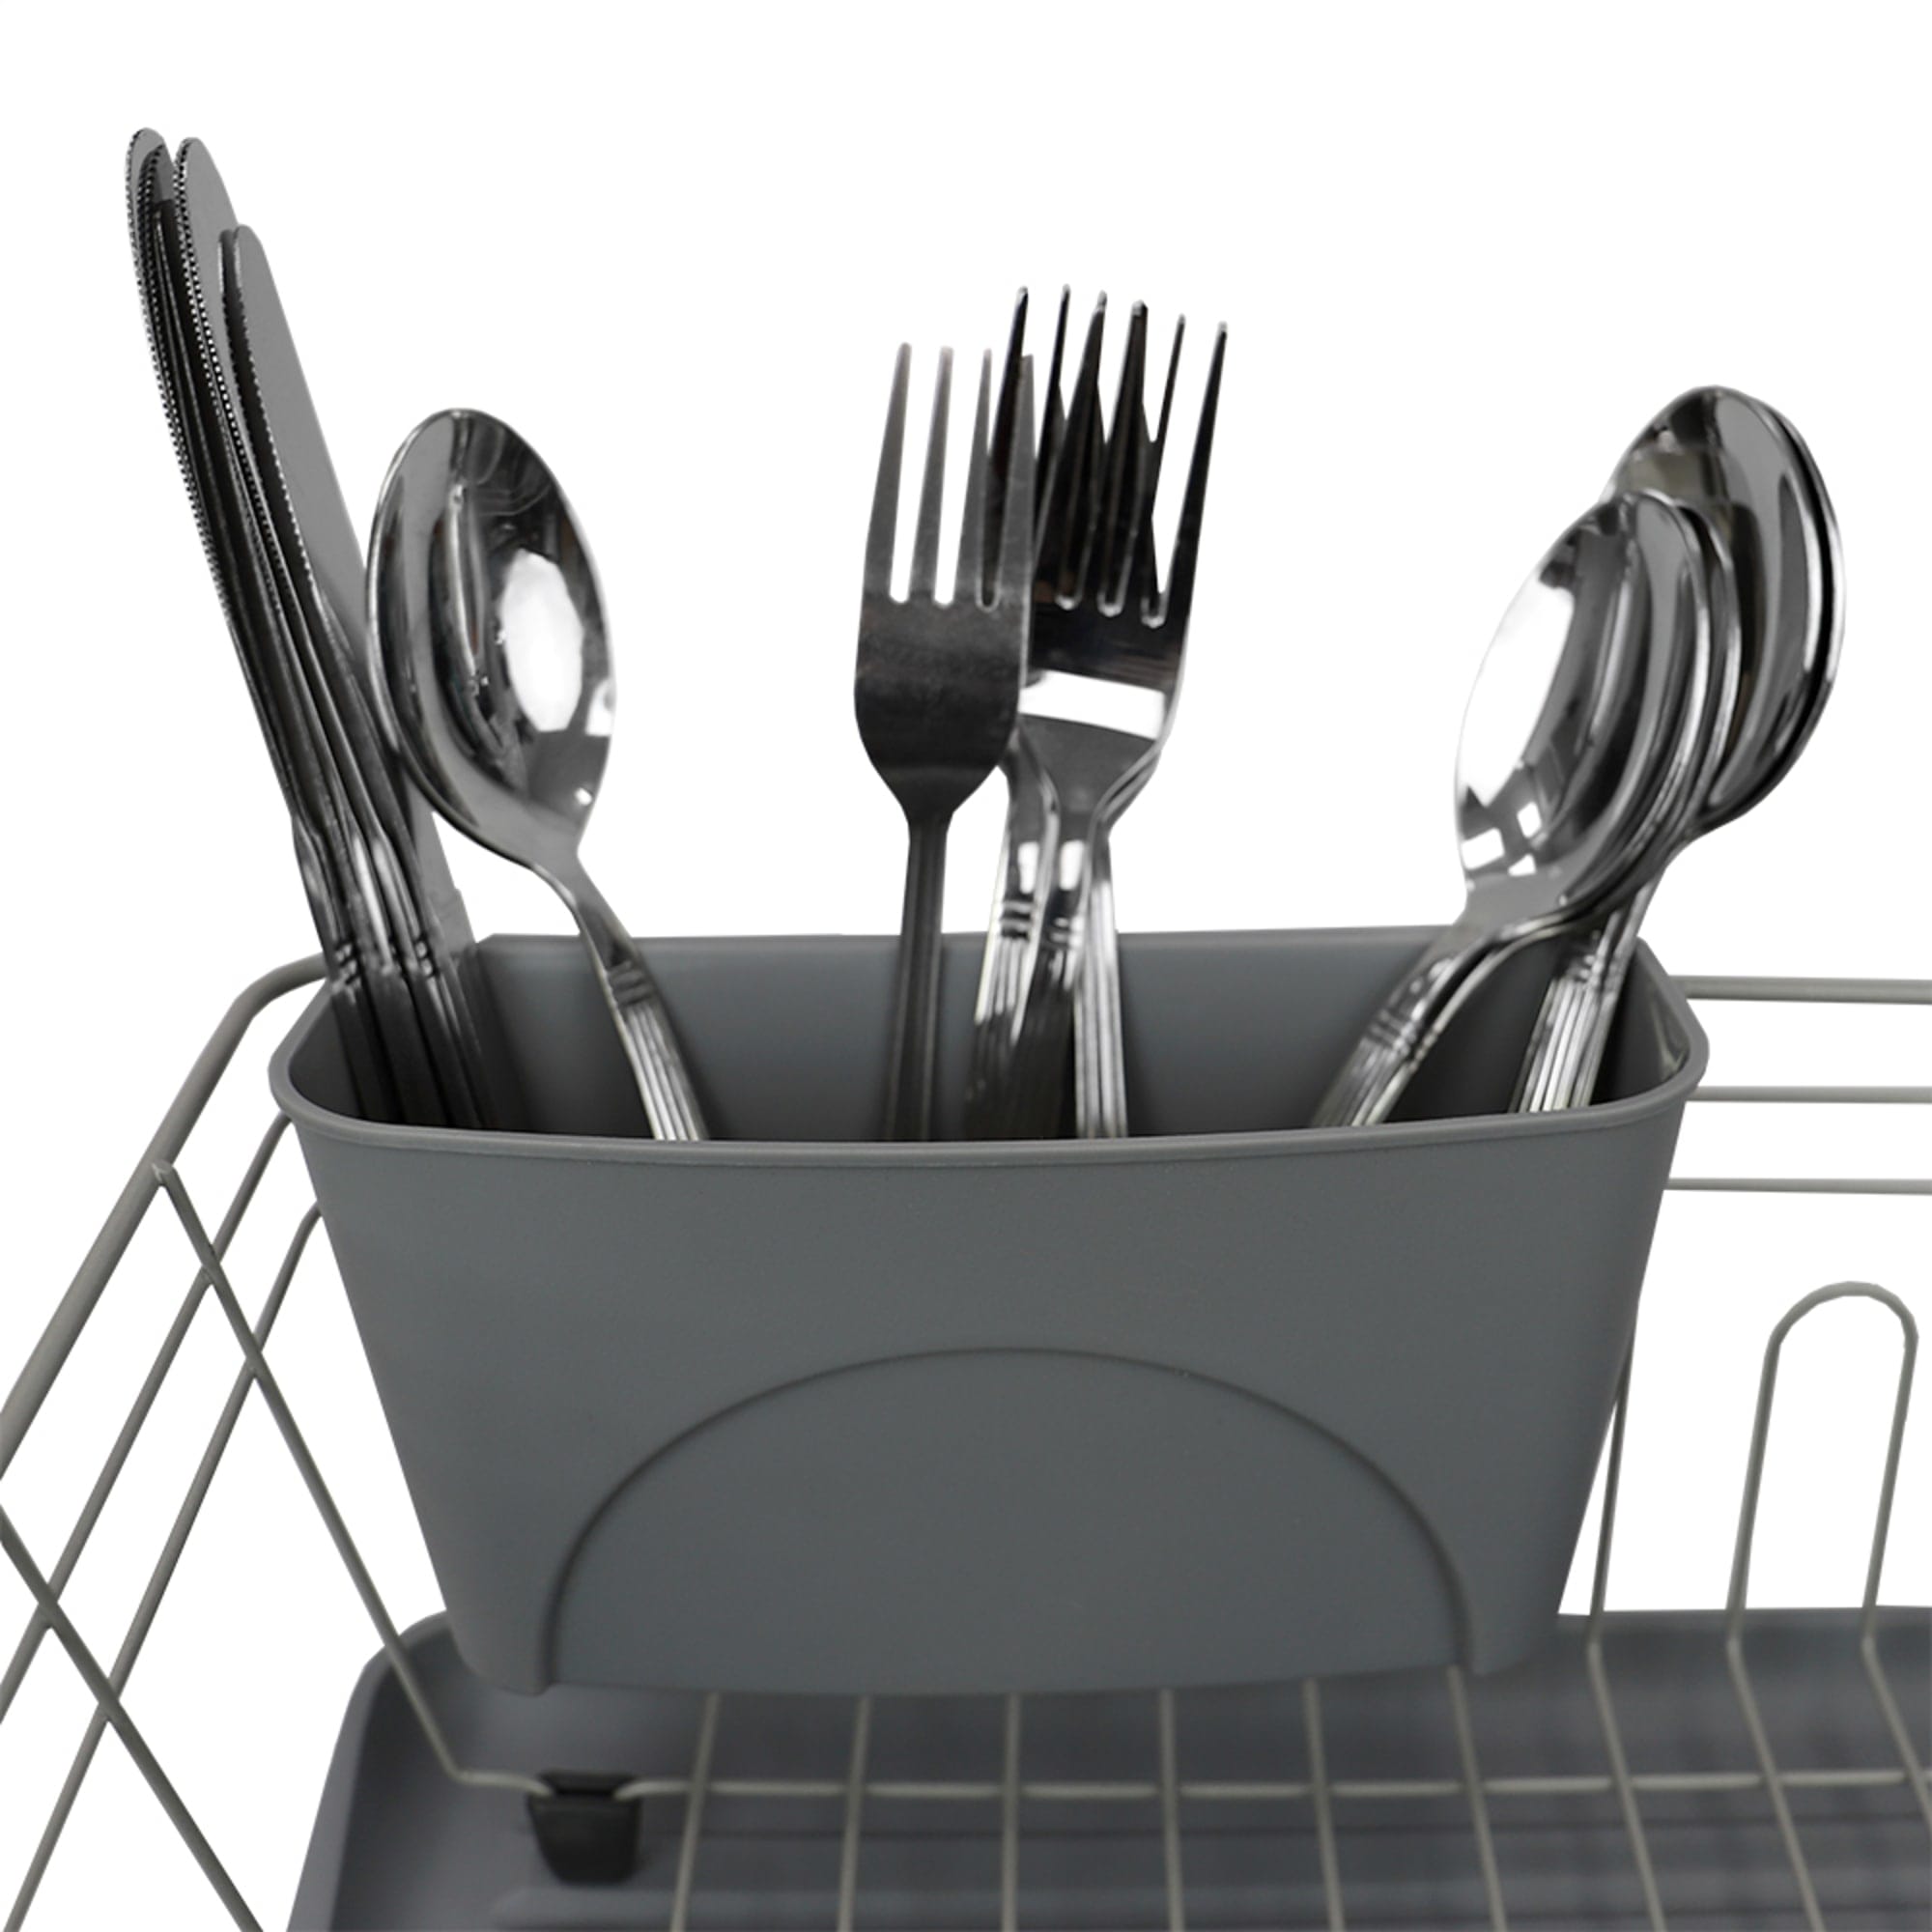 Home Basics Contempo 3 Piece Dish Rack, Grey $10.00 EACH, CASE PACK OF 6